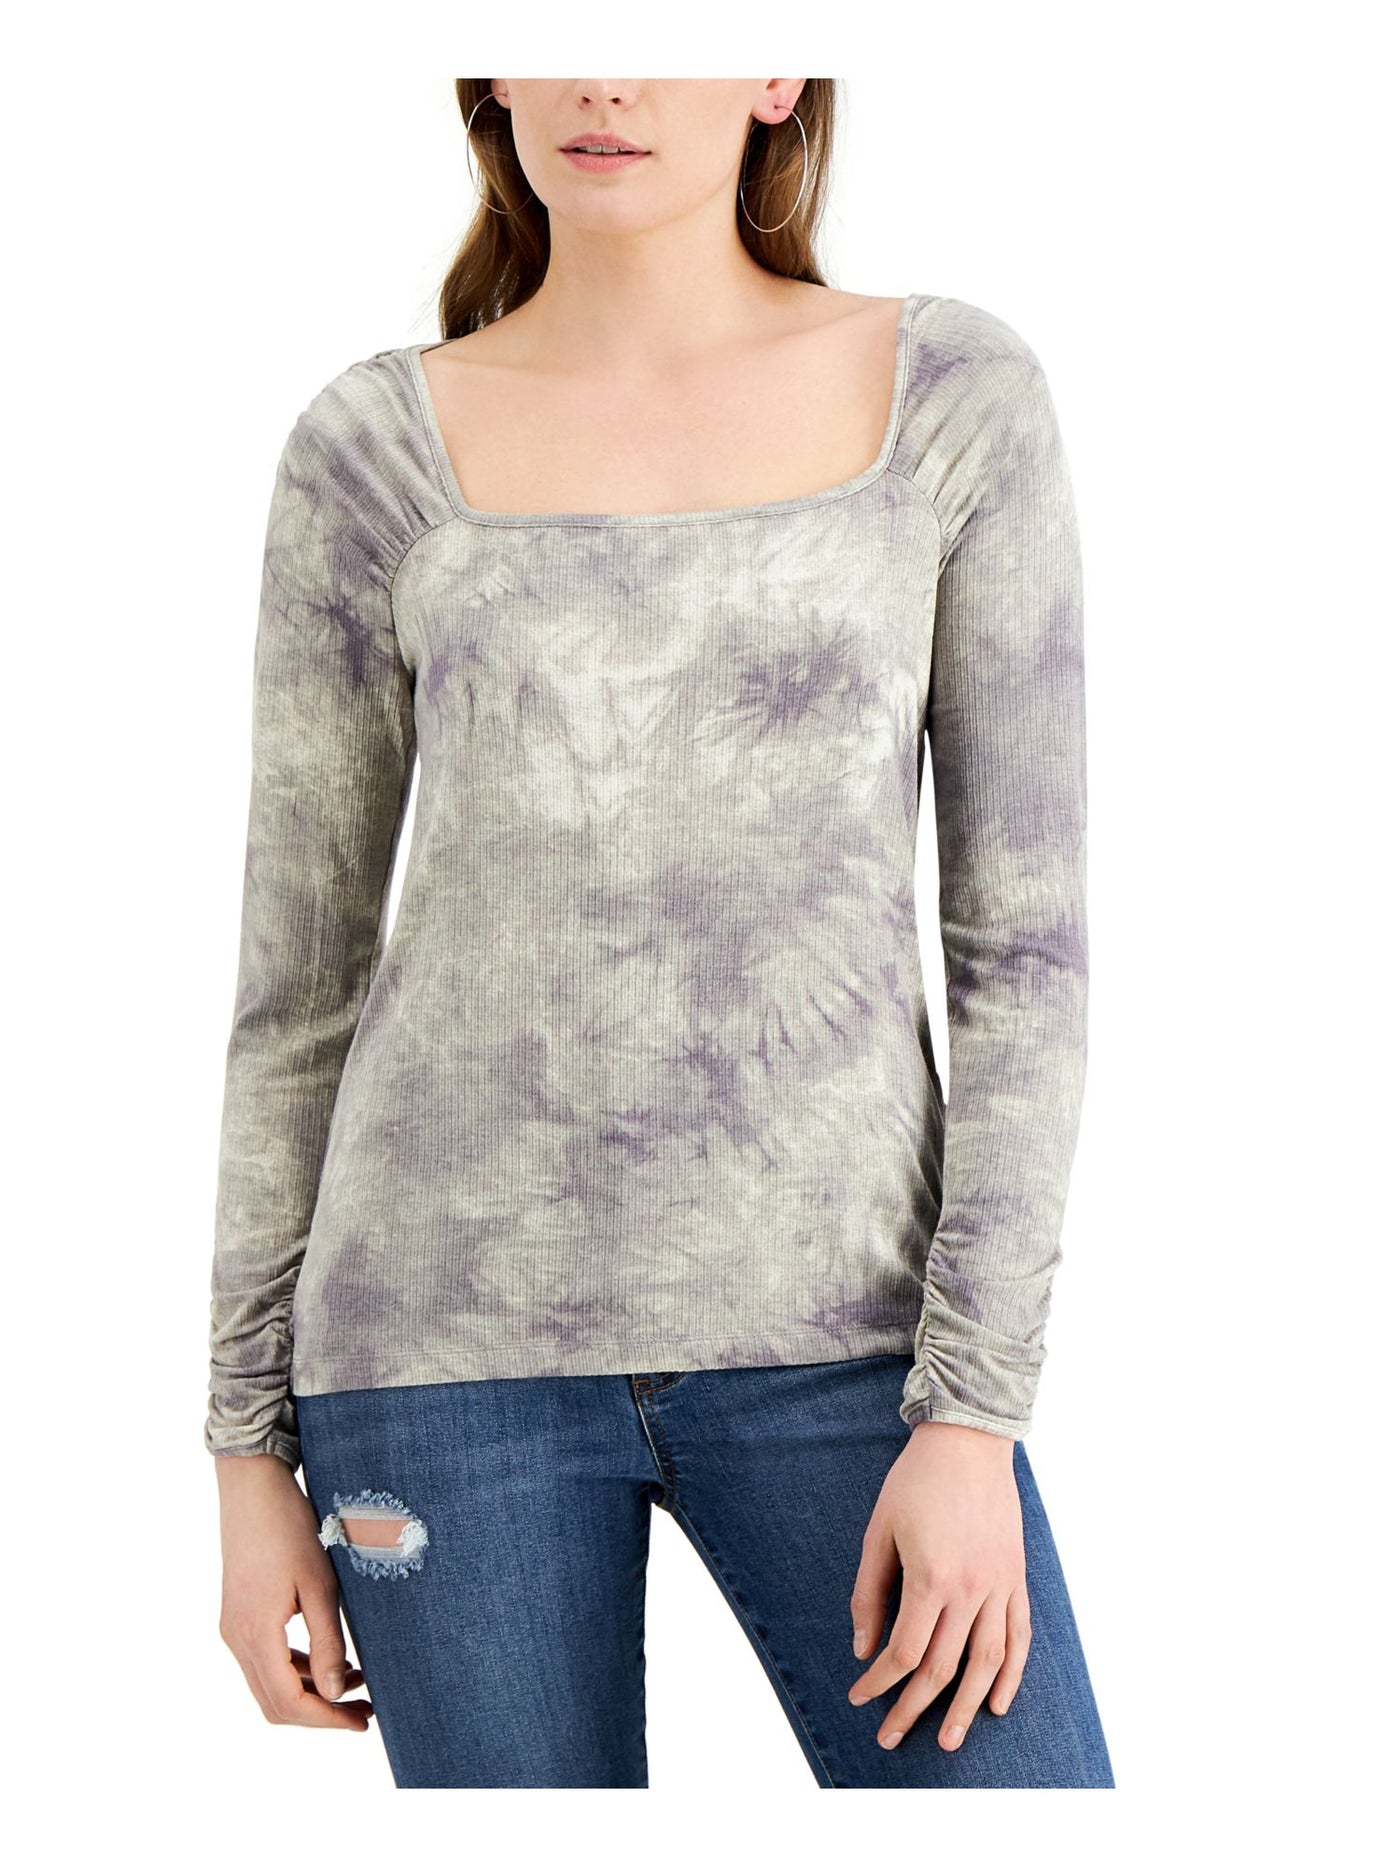 FEVER Womens Beige Ribbed Tie Dye Long Sleeve Square Neck Top Size: XS